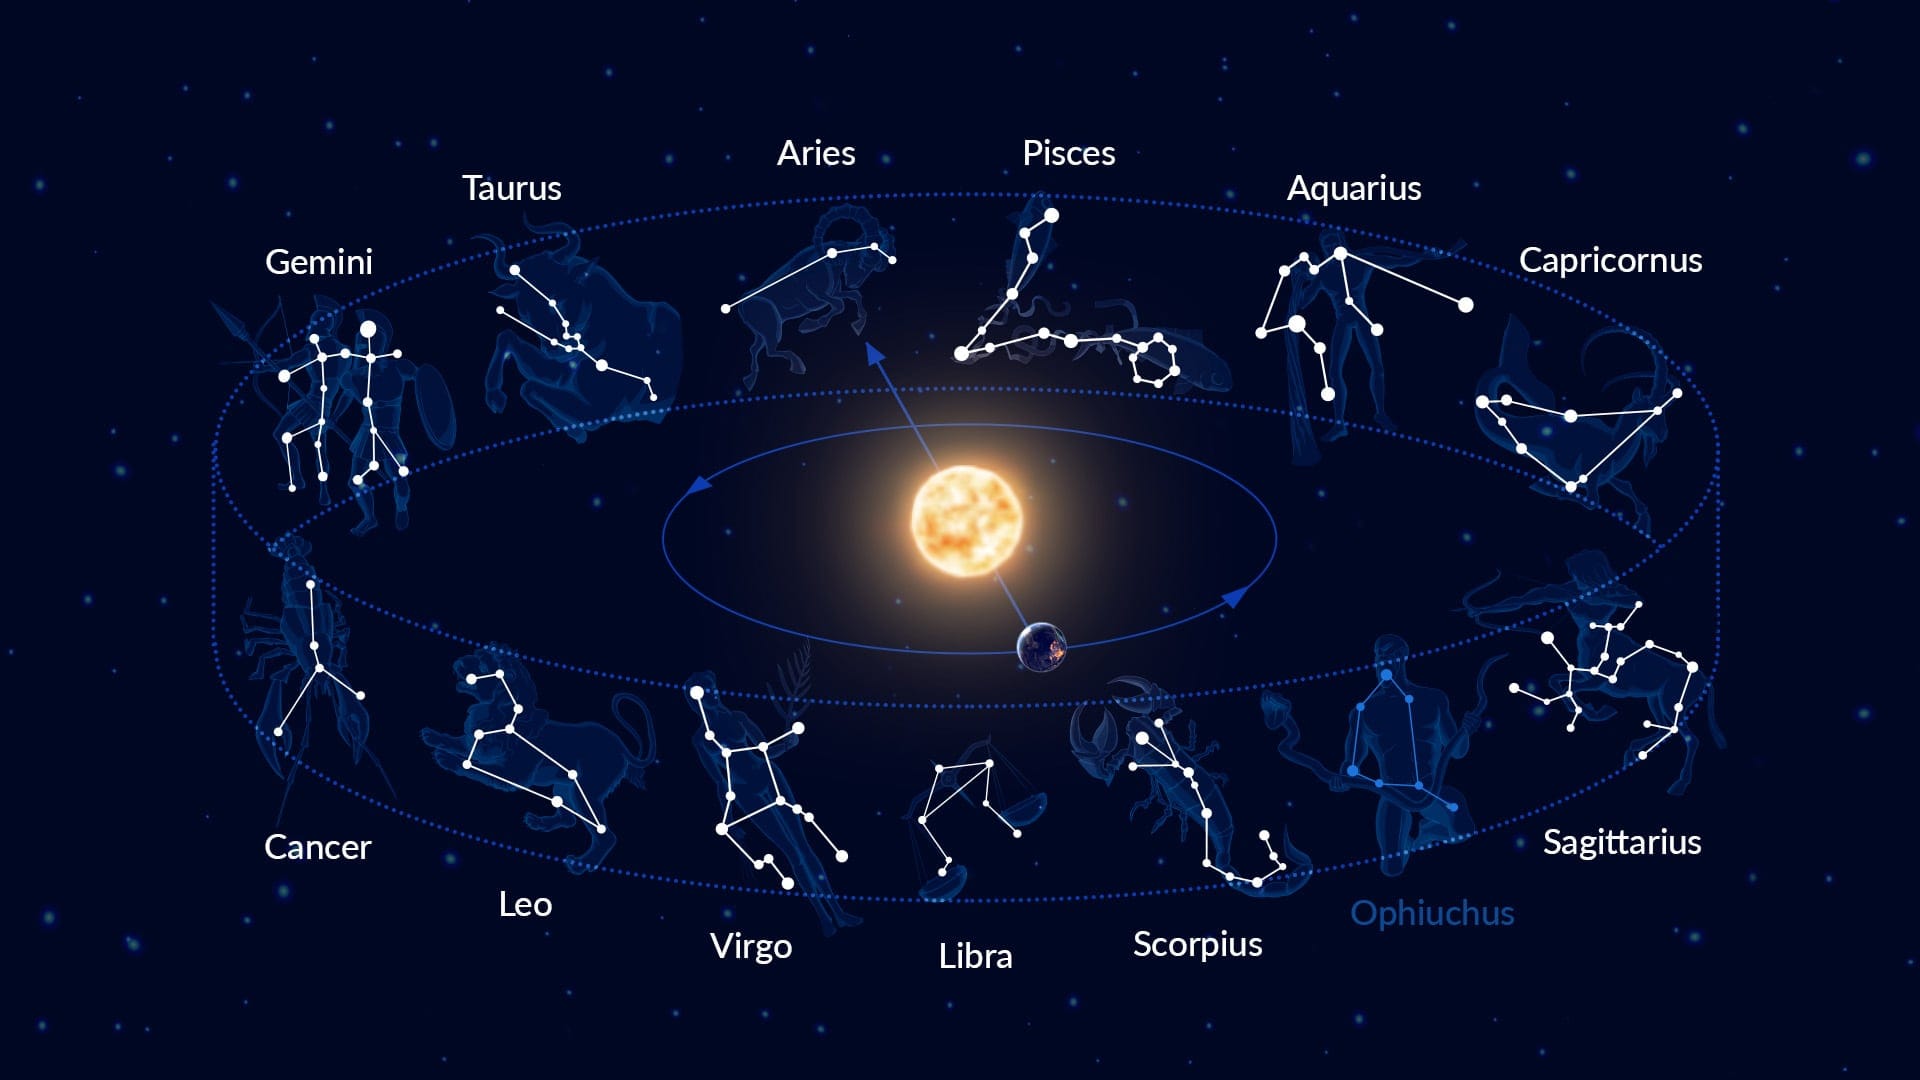 the zodiac signs along the ecliptic